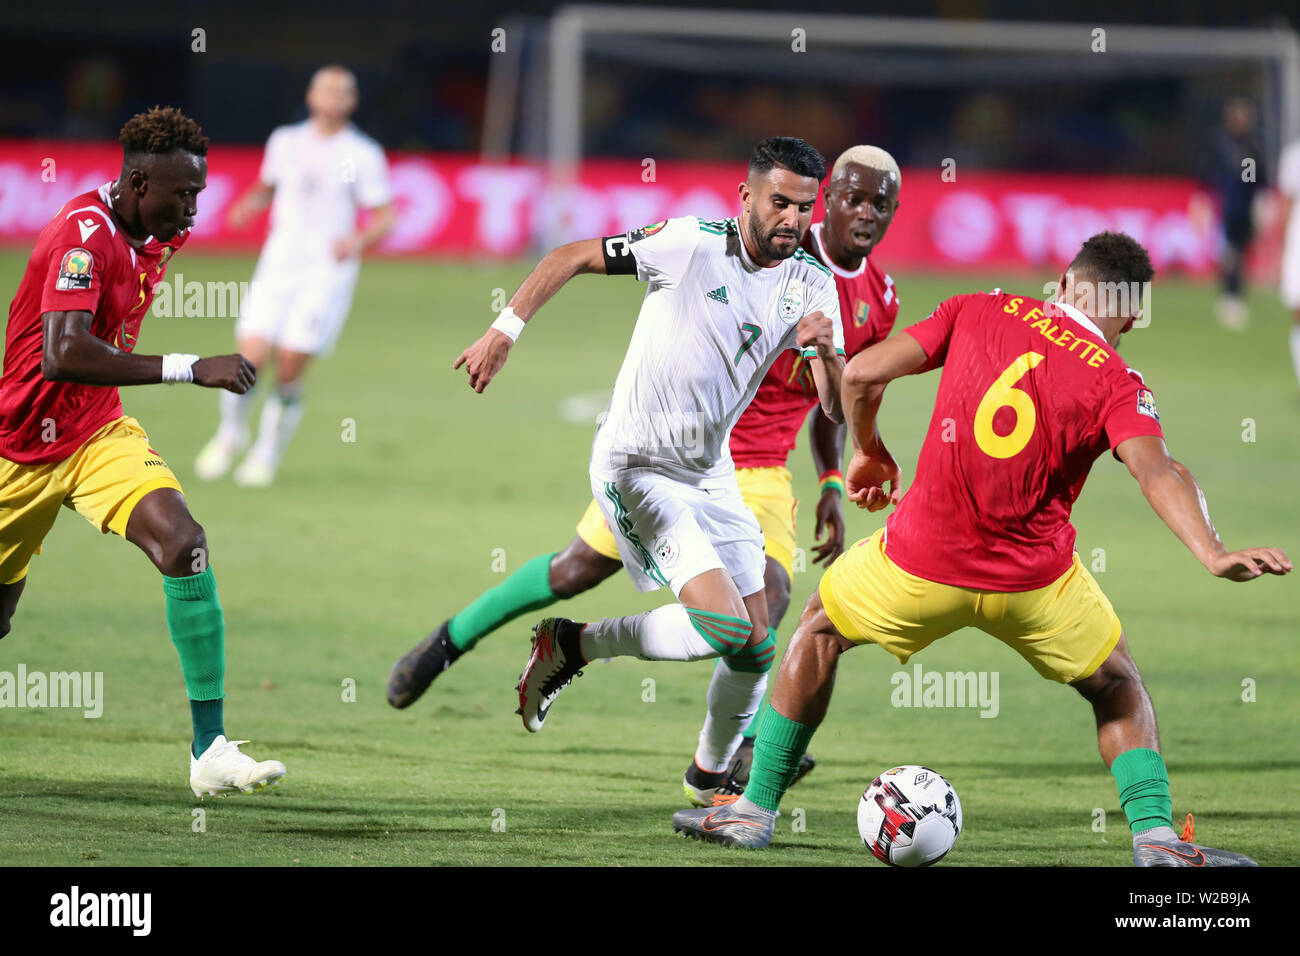 Cairo, Egypt. 7th July, 2019. Riyad Mahrez (C) of Algeria vies with Simon Falette (1st R) of Guinea during the 2019 Africa Cup of Nations match between Algeria and Guinea in Cairo, Egypt, on July 7, 2019. Algeria won 3-0. Credit: Ahmed Gomaa/Xinhua/Alamy Live News Stock Photo